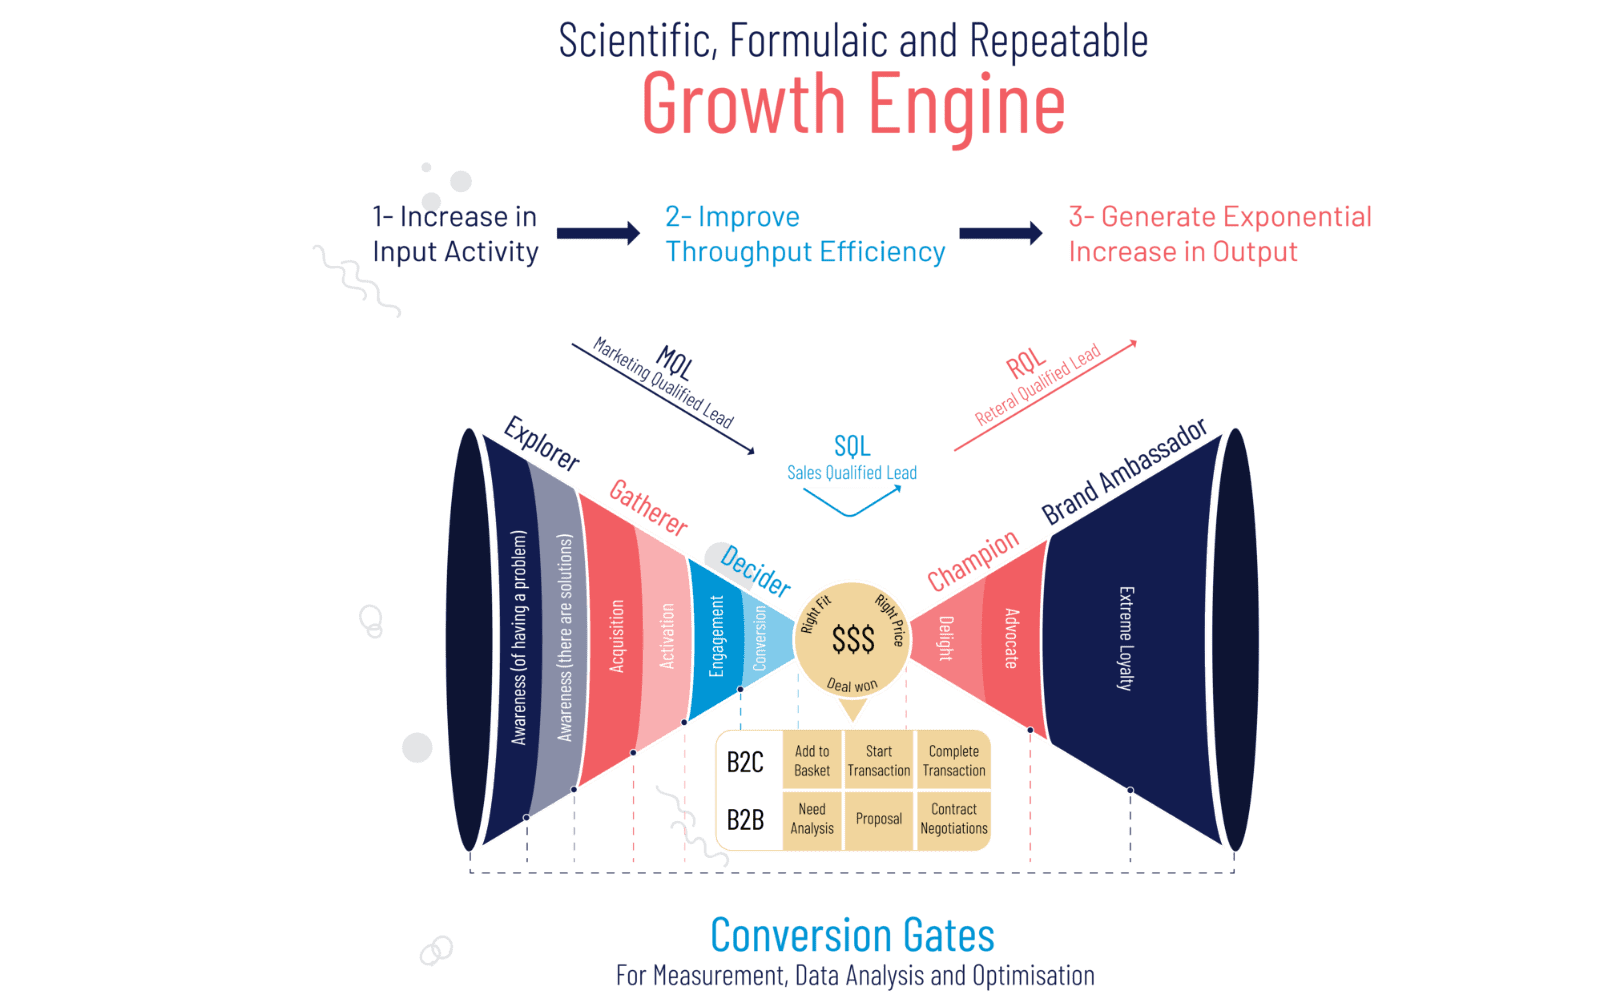 What is a growth engine? A growth engine is a systemised, repeatable, scalable and scientific method for attracting, converting and retaining ever increasing numbers of prospects, customers and loyal followers. Growth Engines Have Three Phases In the Marketing phase we help find, validate and engage your target audience through a deeper understanding of your customer and by testing copy, offers and guarantees to find what works. We also find new customer options that you may not have thought of! In the Sales phase, we totally streamline and improve the efficiency of your sales process using data, automation and AI. Helping your brand engage the most lucrative target audiences, nurture them and maximise the number that become repeat customers. In the Referral phase, we help ensure you systematically add maximum value for minimum effort using tried and tested methods and processes that will work for your business growth options. We help you delight your customers with attentive service, encouraging them to share your products, services, brand stories and successes. Effortlessly and automatically spreading the benefits of your brand.